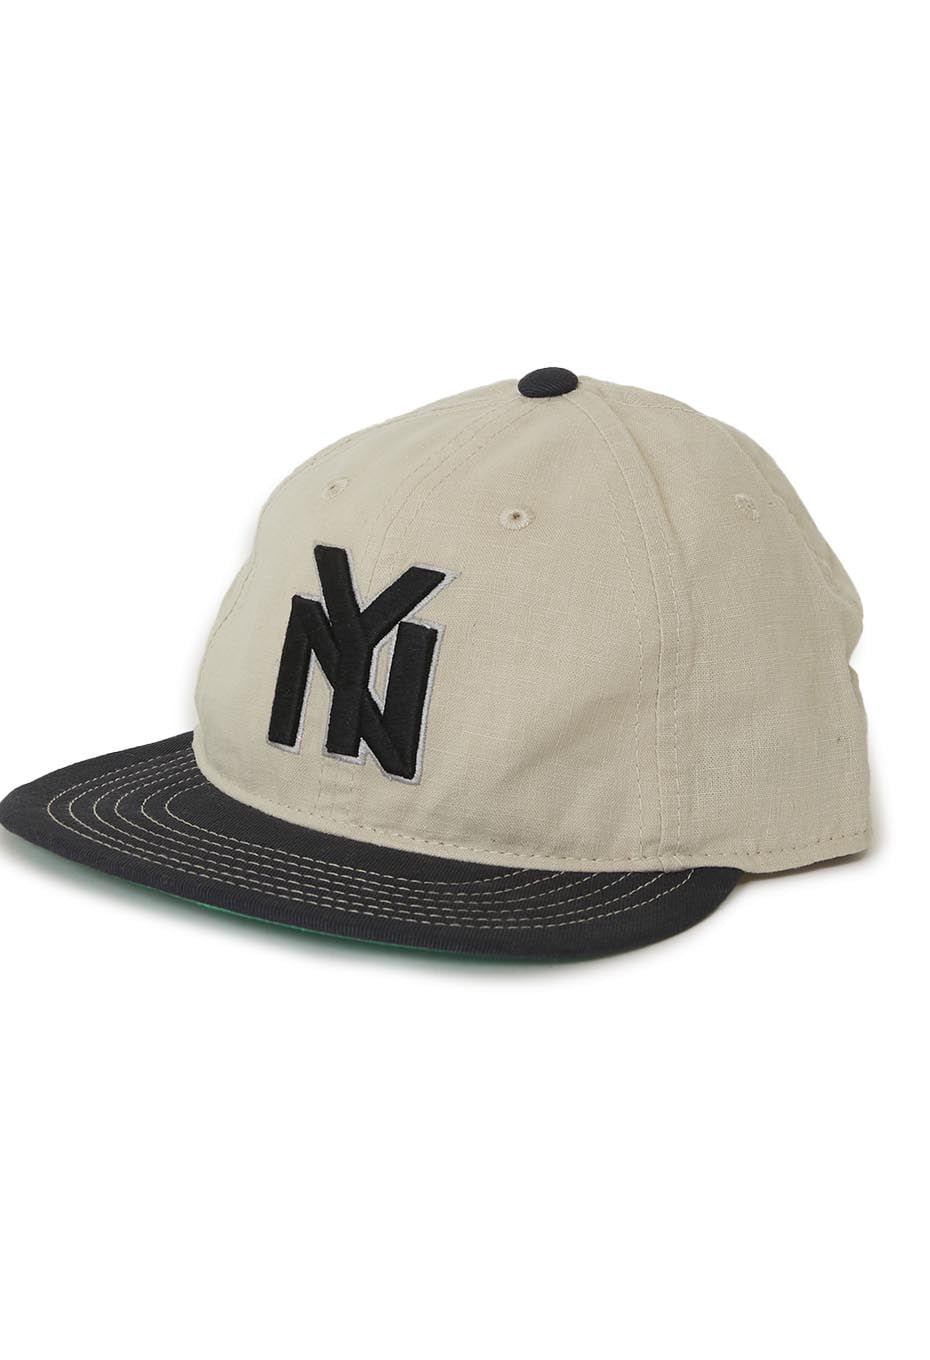 AMERICAN NEEDLE Archive 400 Series LINEOUT NEW YORK BLACK YANKEES Cap